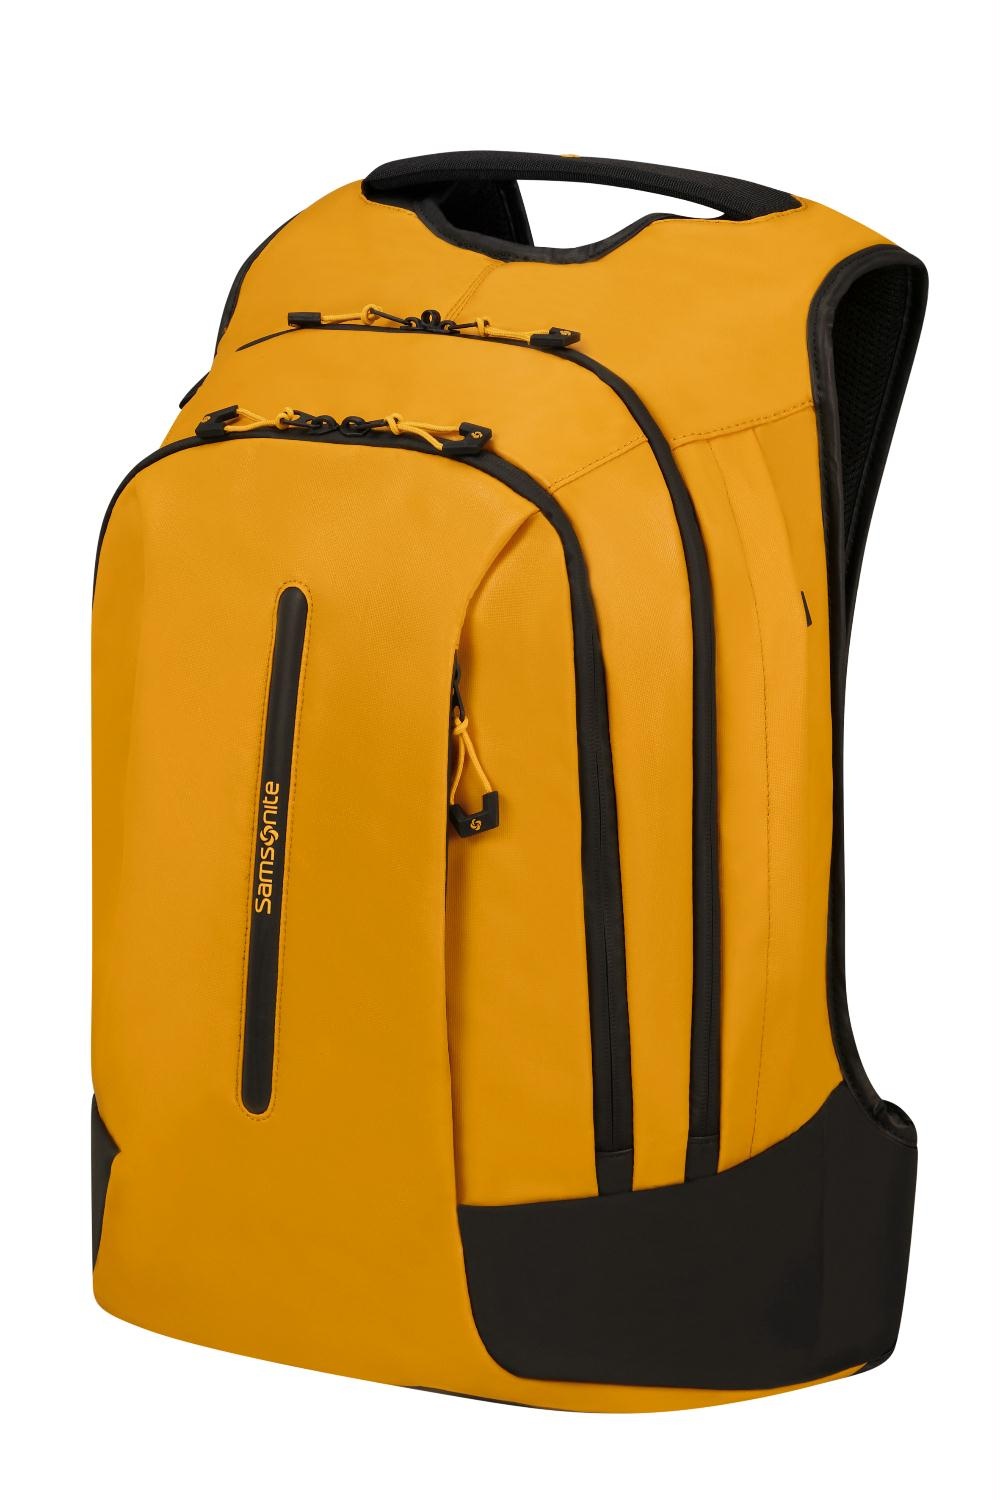 ECODIVER LAPTOP BACKPACK L YELLOW